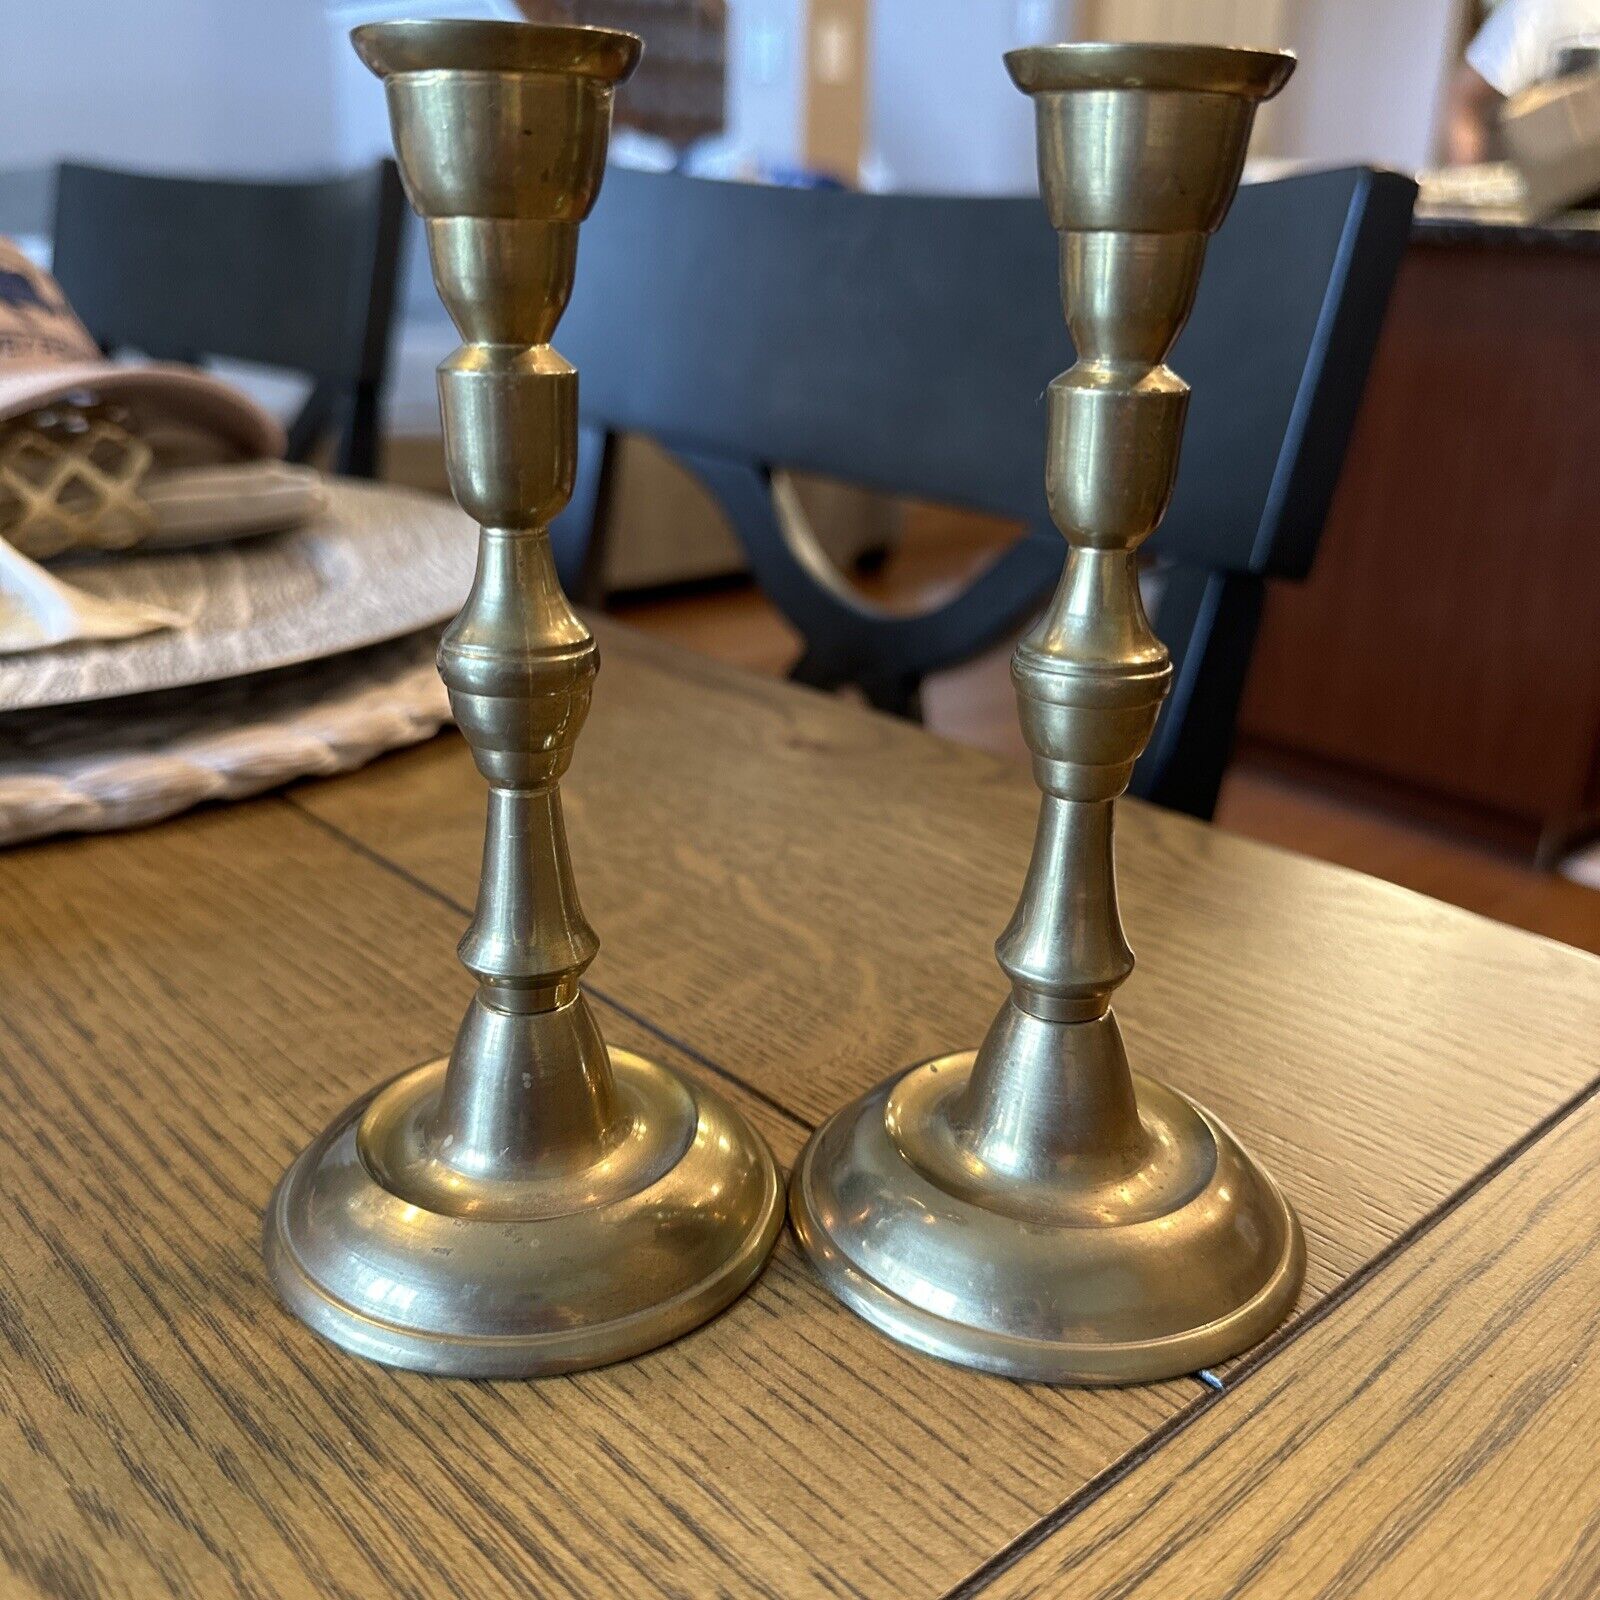 Pair Of Vintage Ornate Solid Brass Candle Sticks Made In India